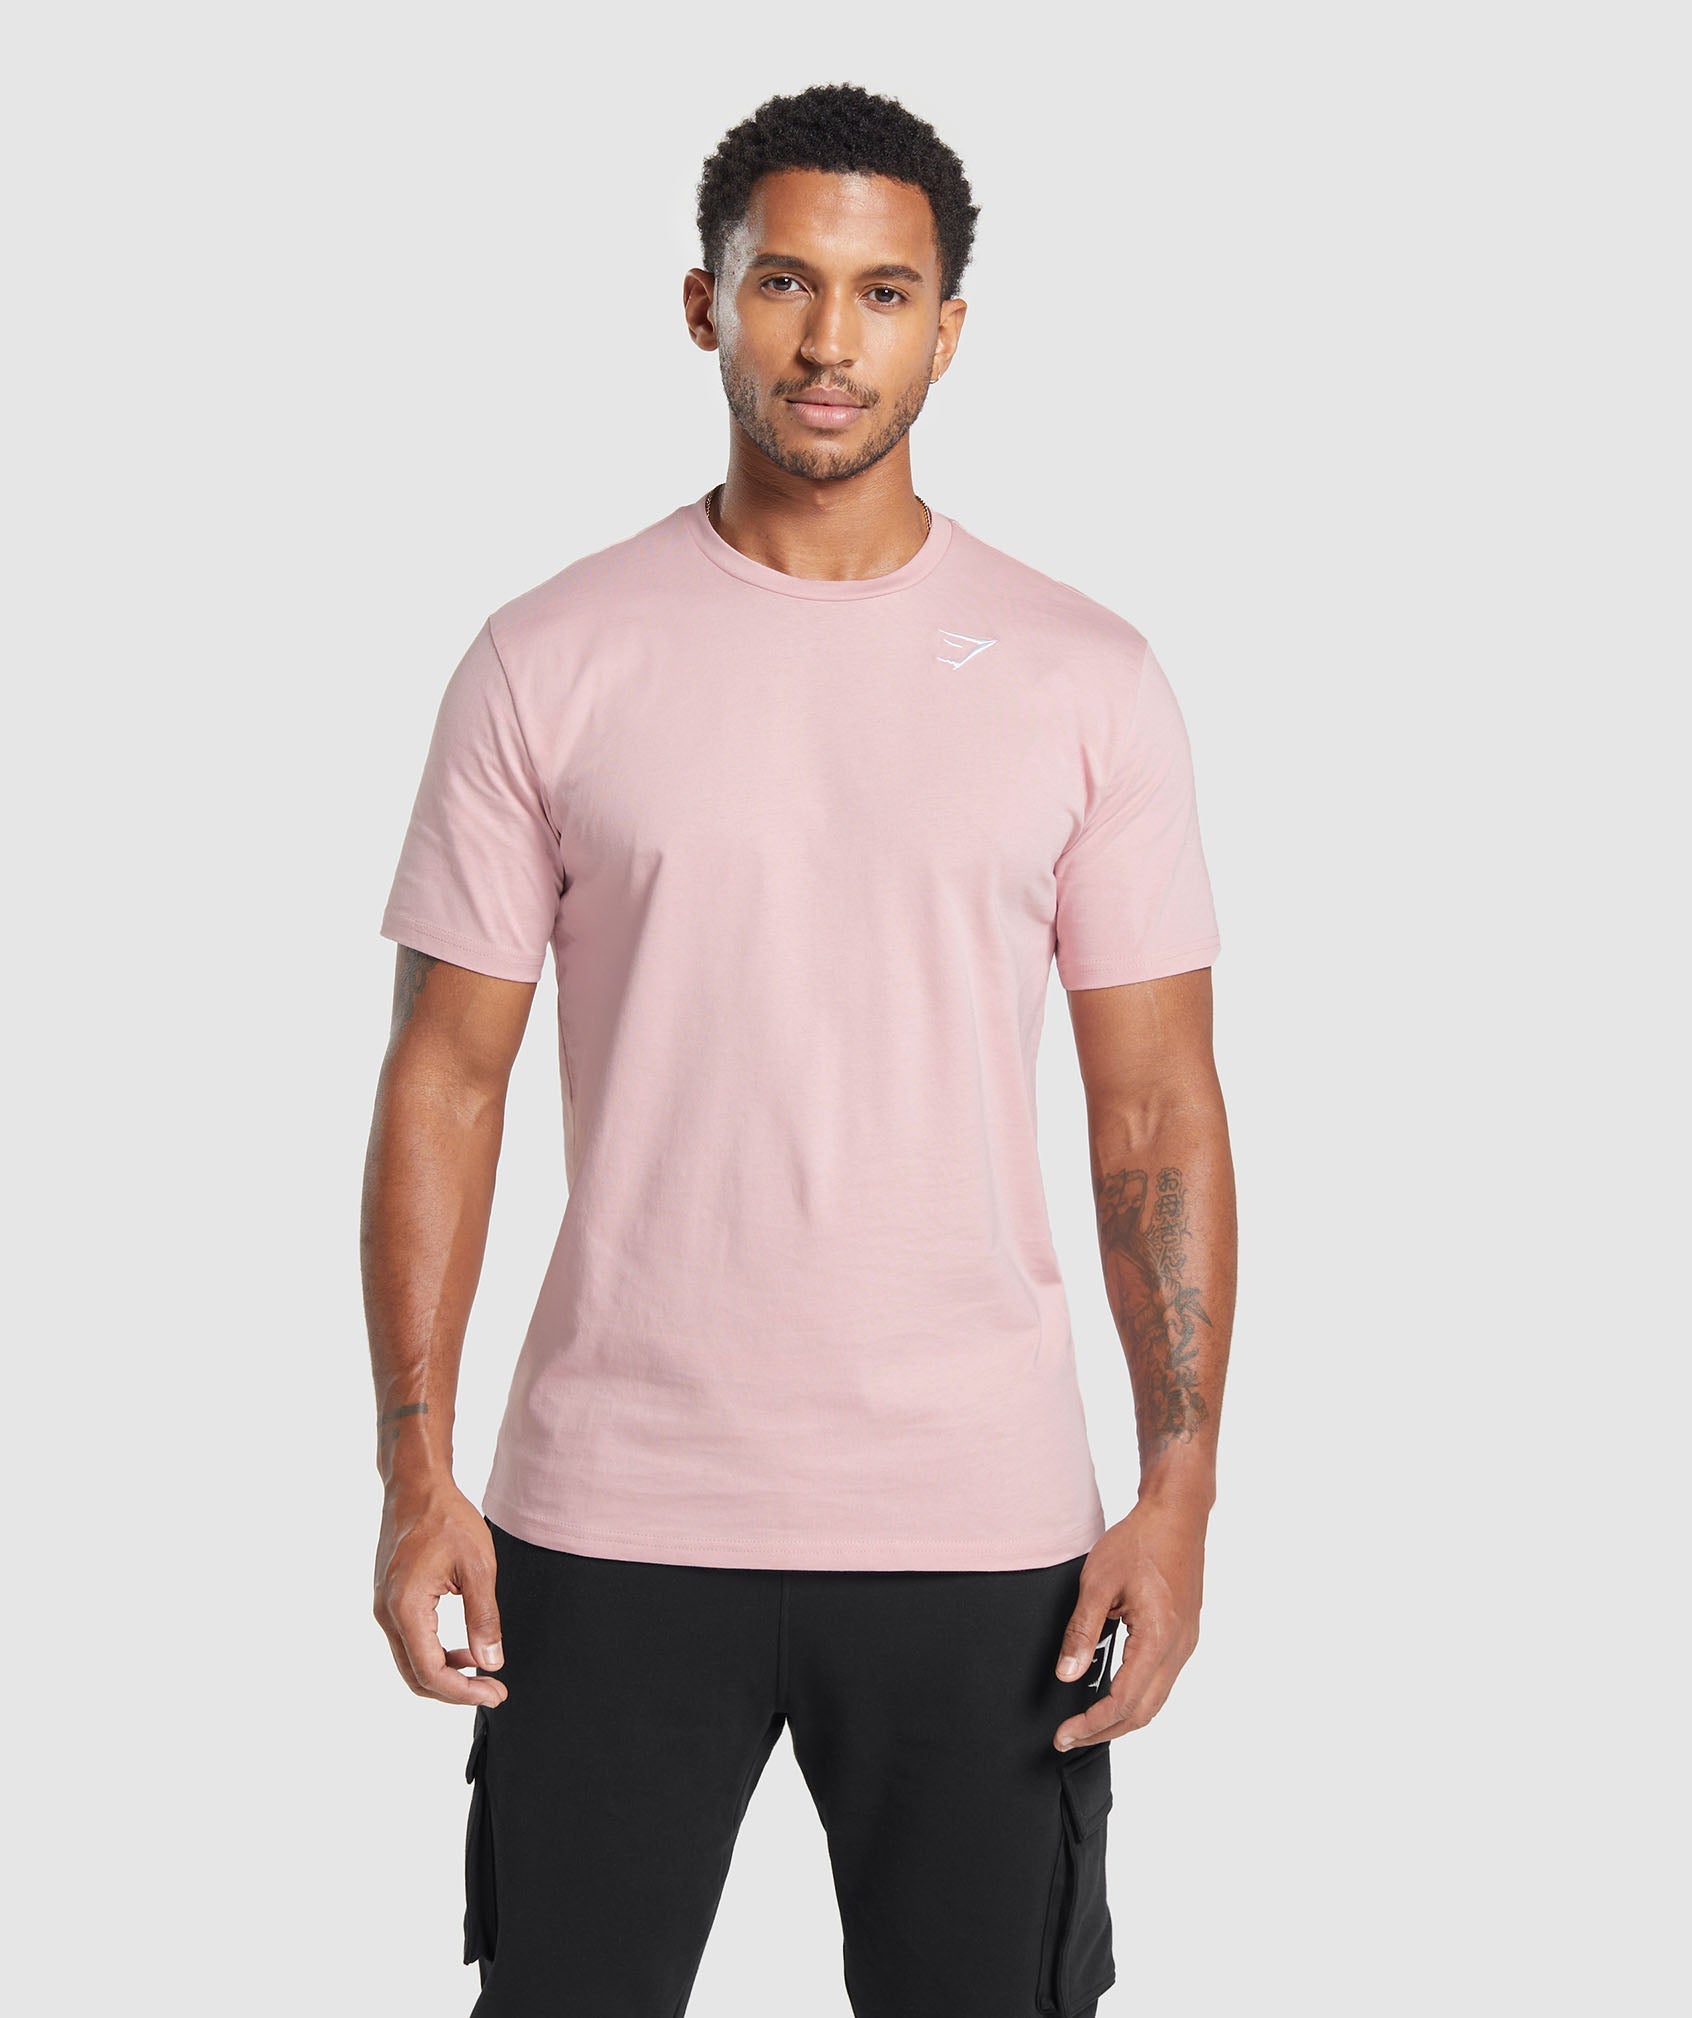 Crest T-Shirt in Light Pink is out of stock